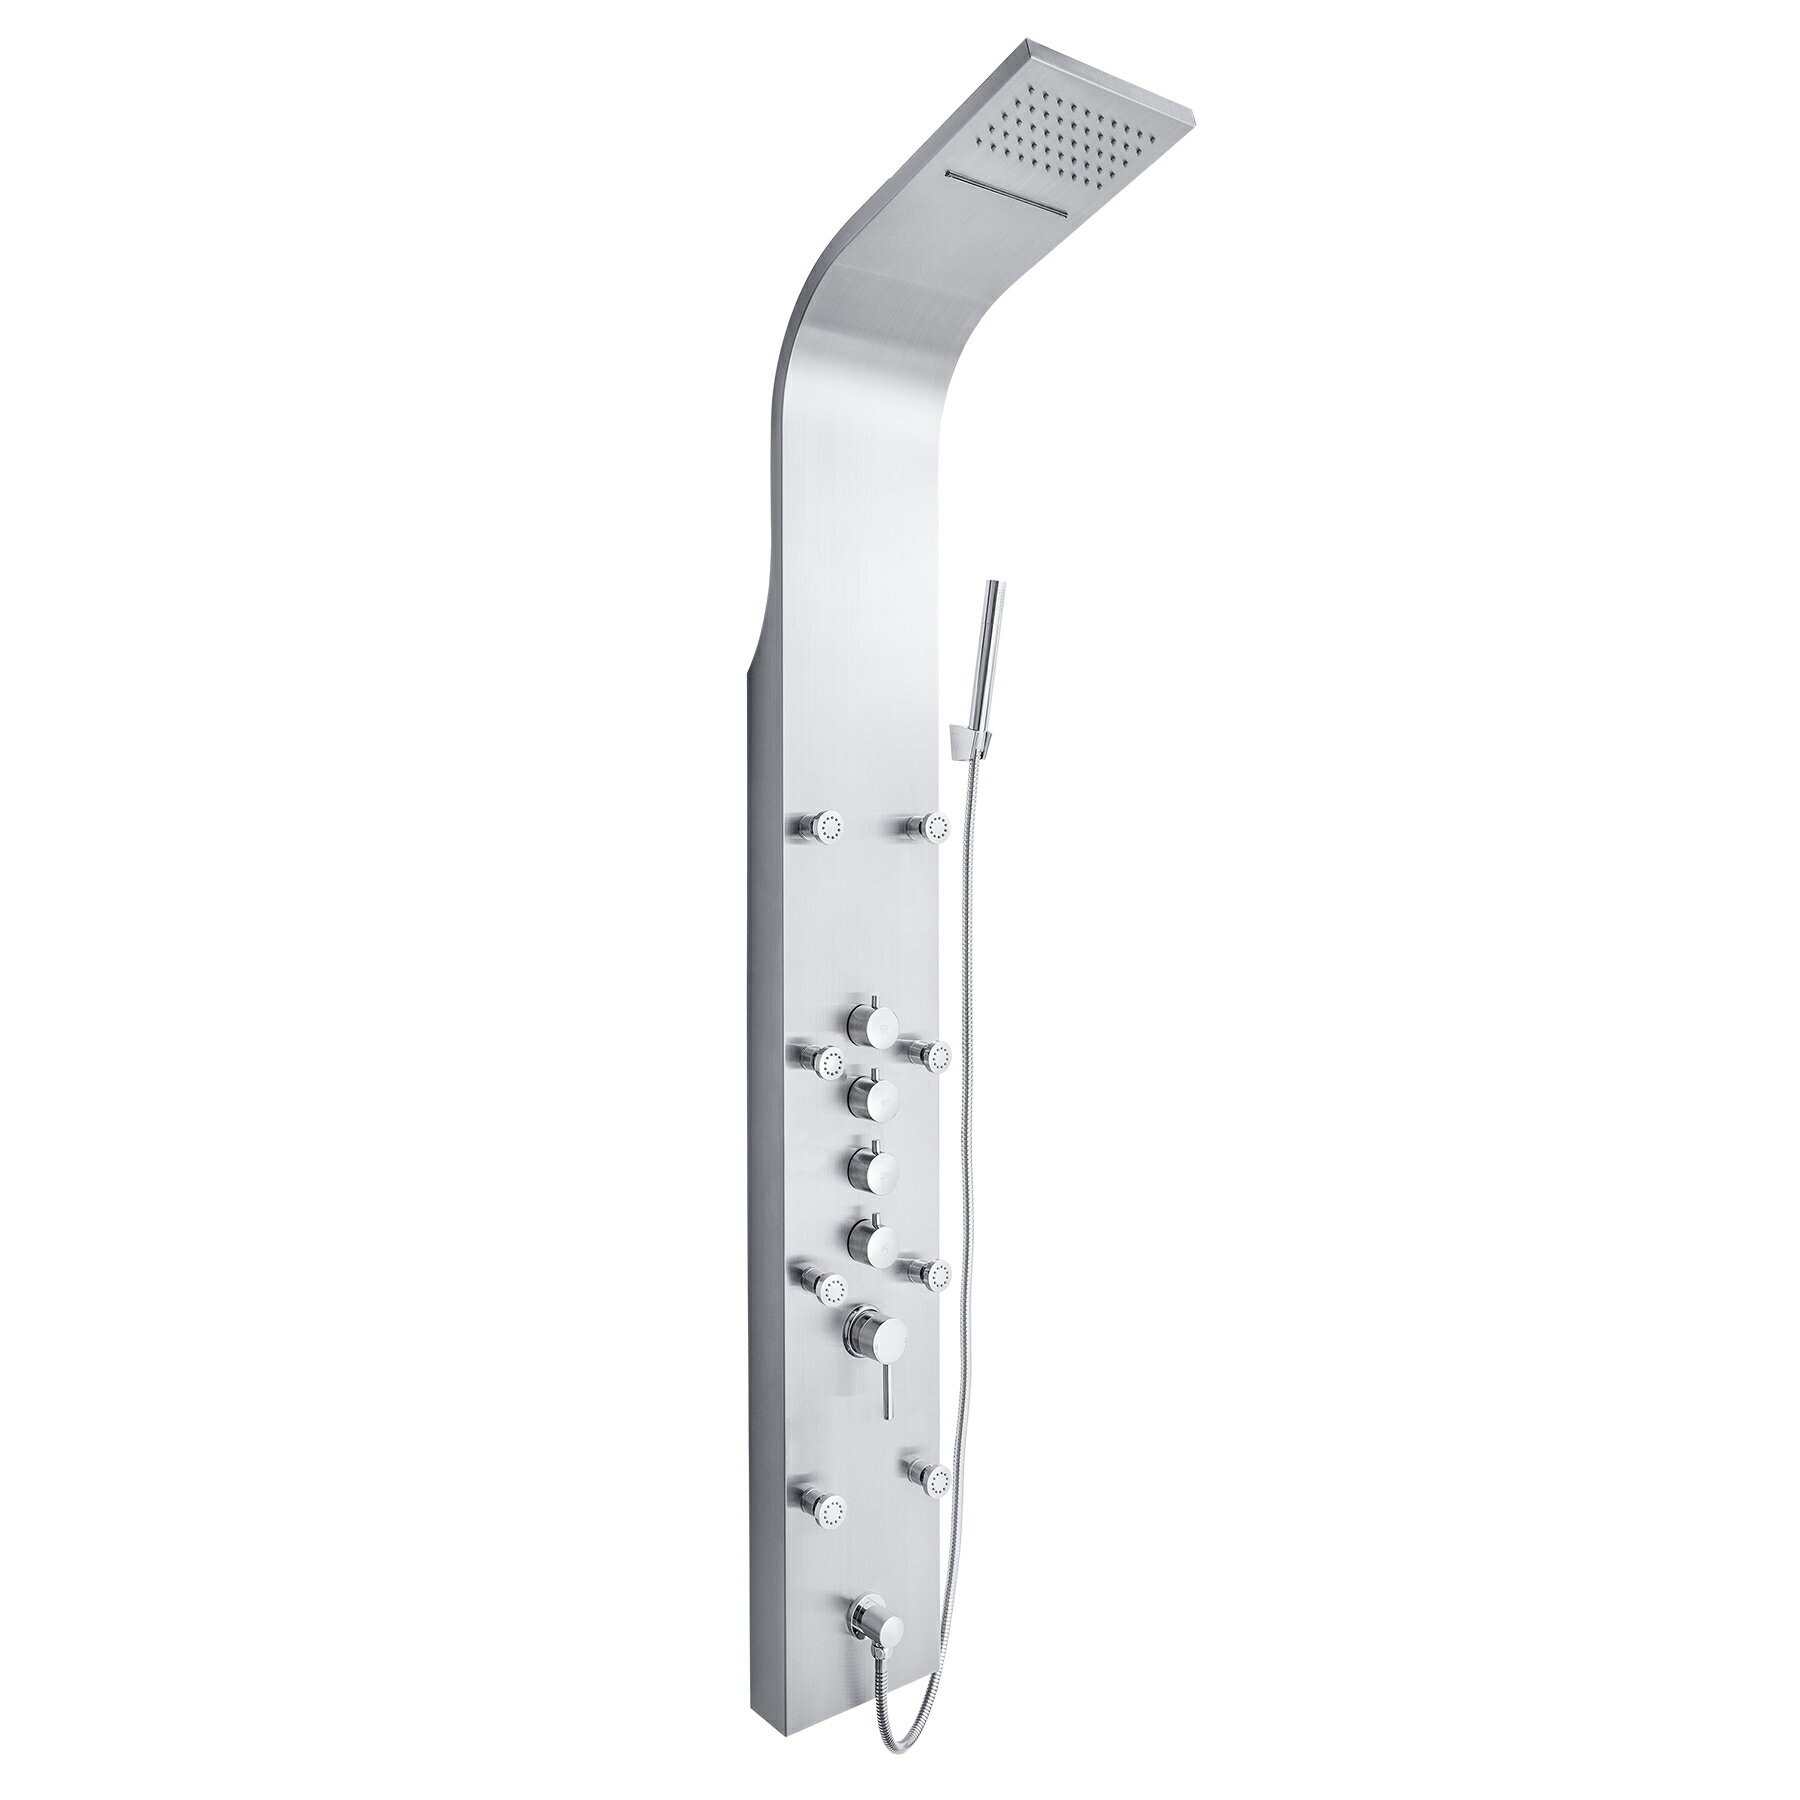 Akdy Simultaneously Operated Shower Panel System - Stainless Steel - Silver - 65-in SP0111